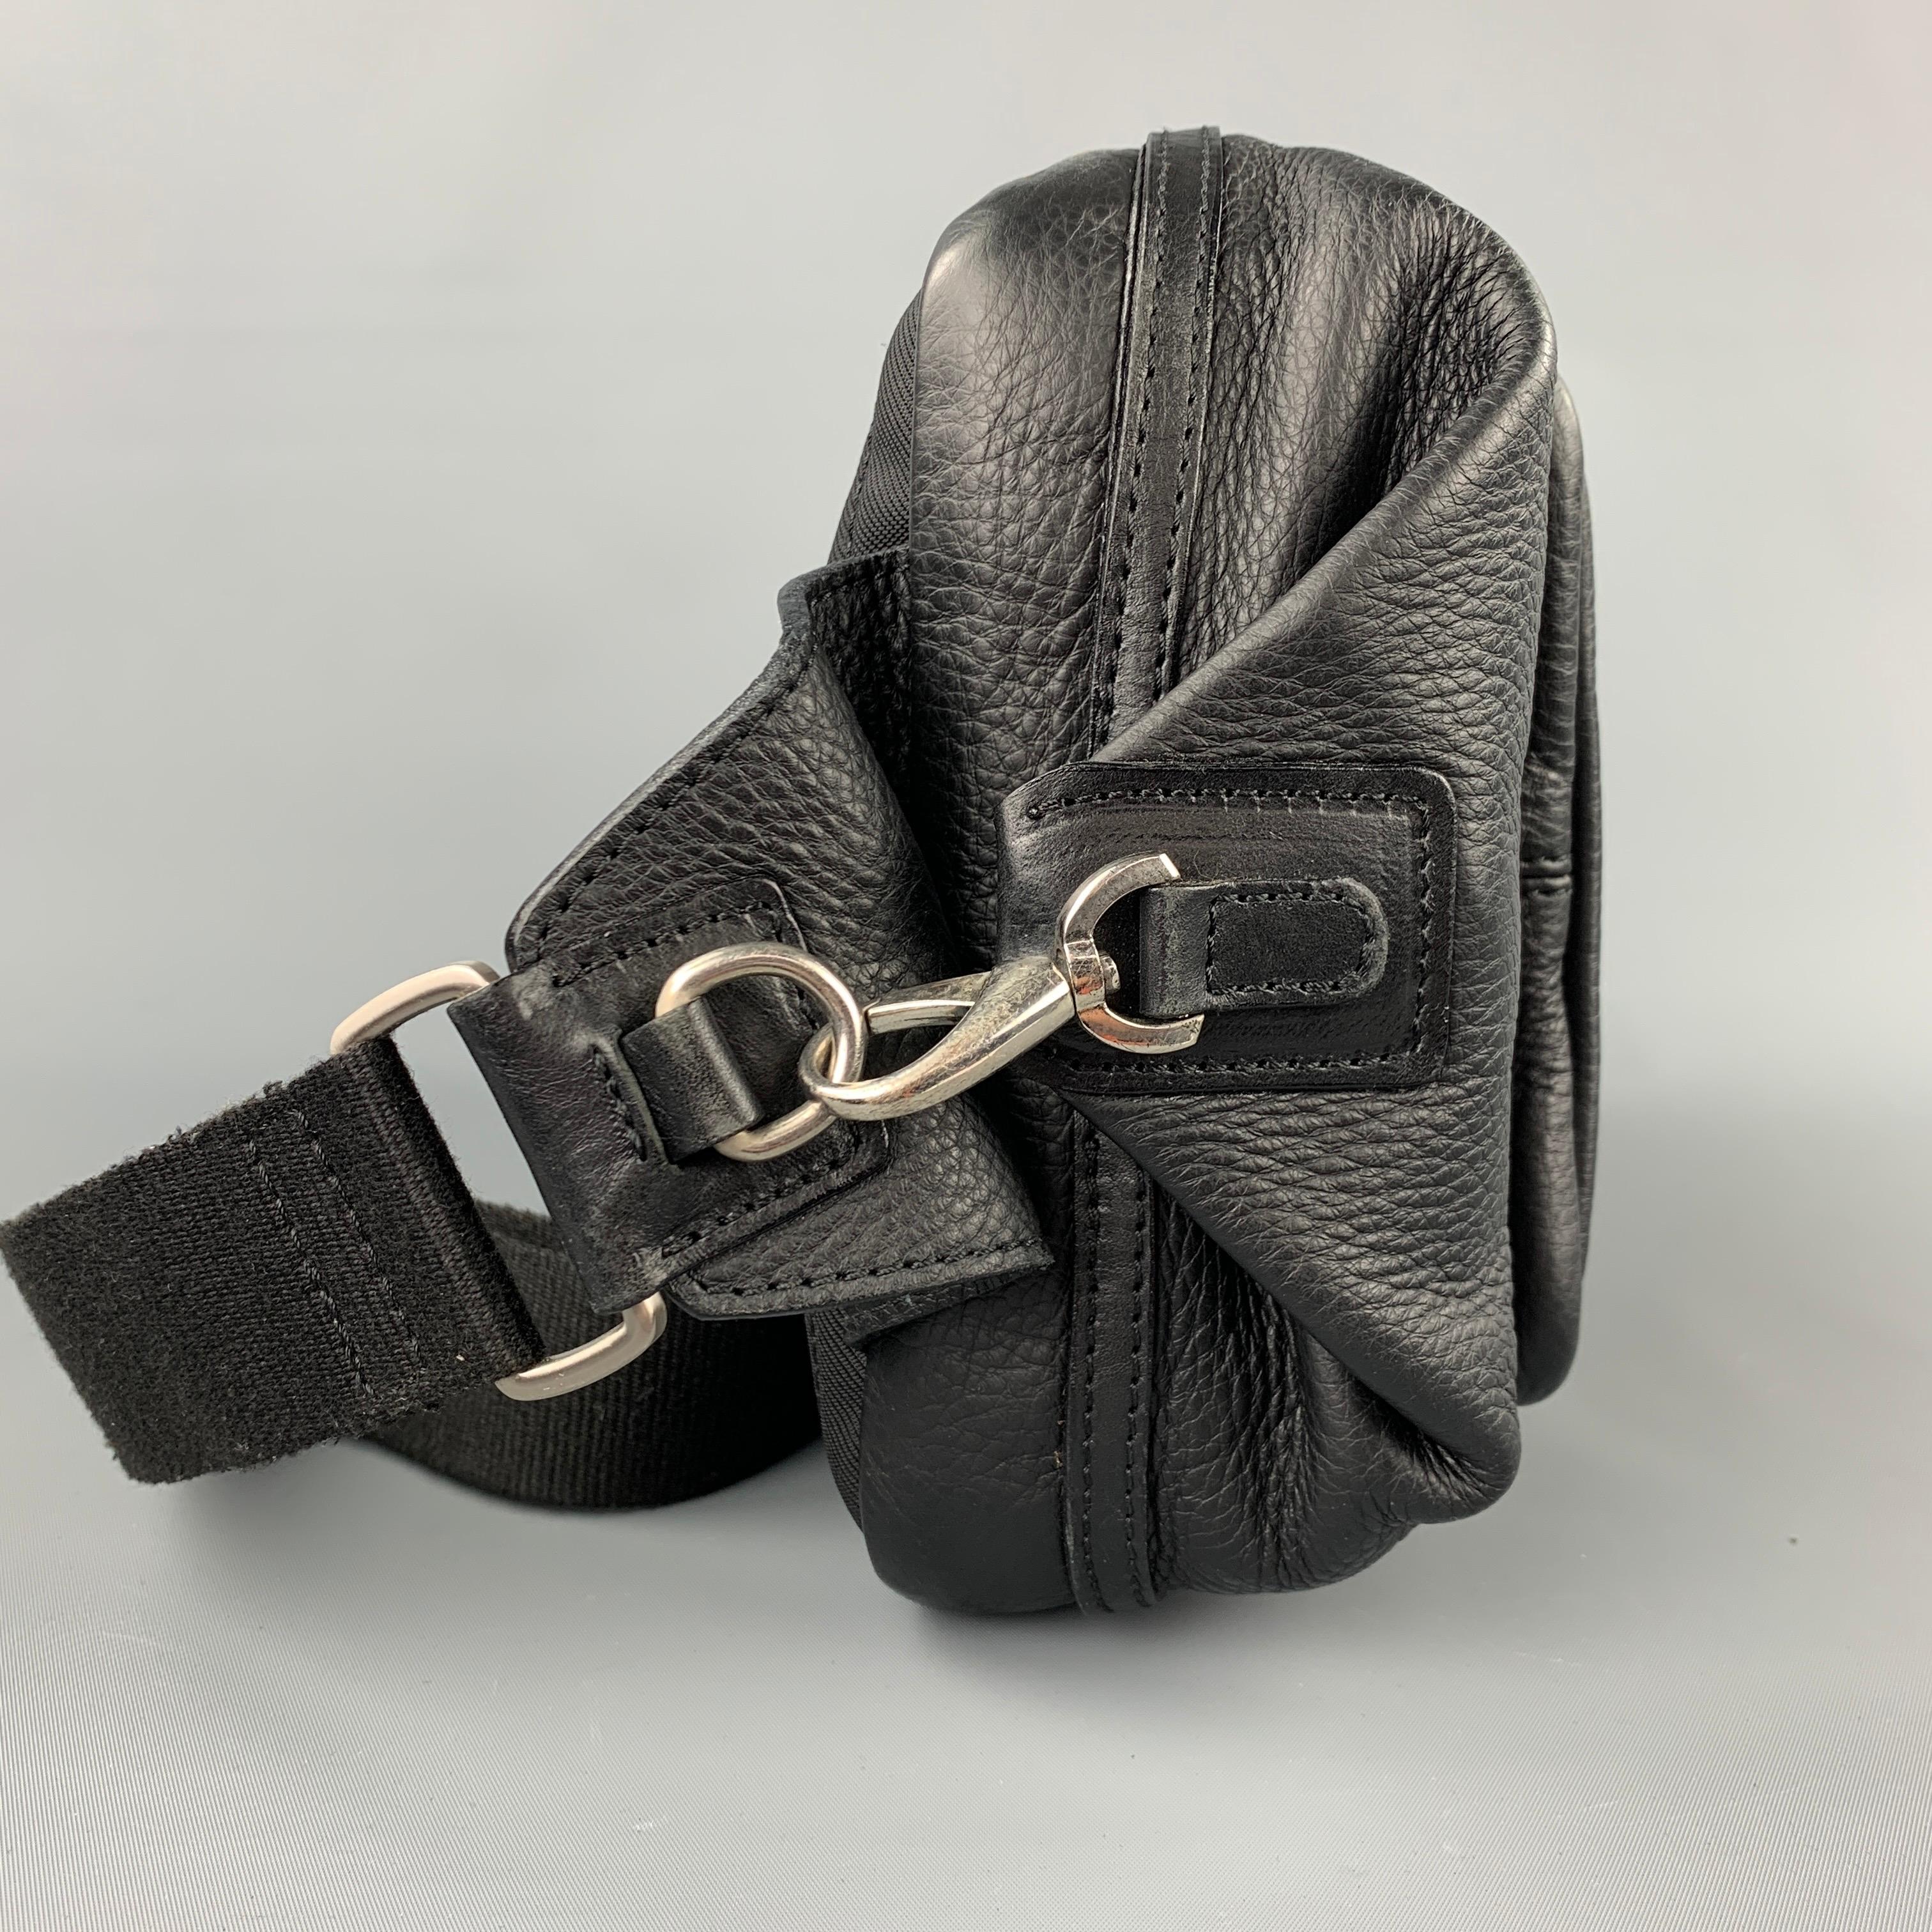 BARNEY'S NEW YORK bag comes in a black pebble grain leather featuring a crossbody strap, front pockets, inner slots, and a zipper closure. Made in Italy.

Very Good Pre-Owned Condition.

Measurements:

Length: 12 in.
Width: 2 in.
Height: 8 in.
 